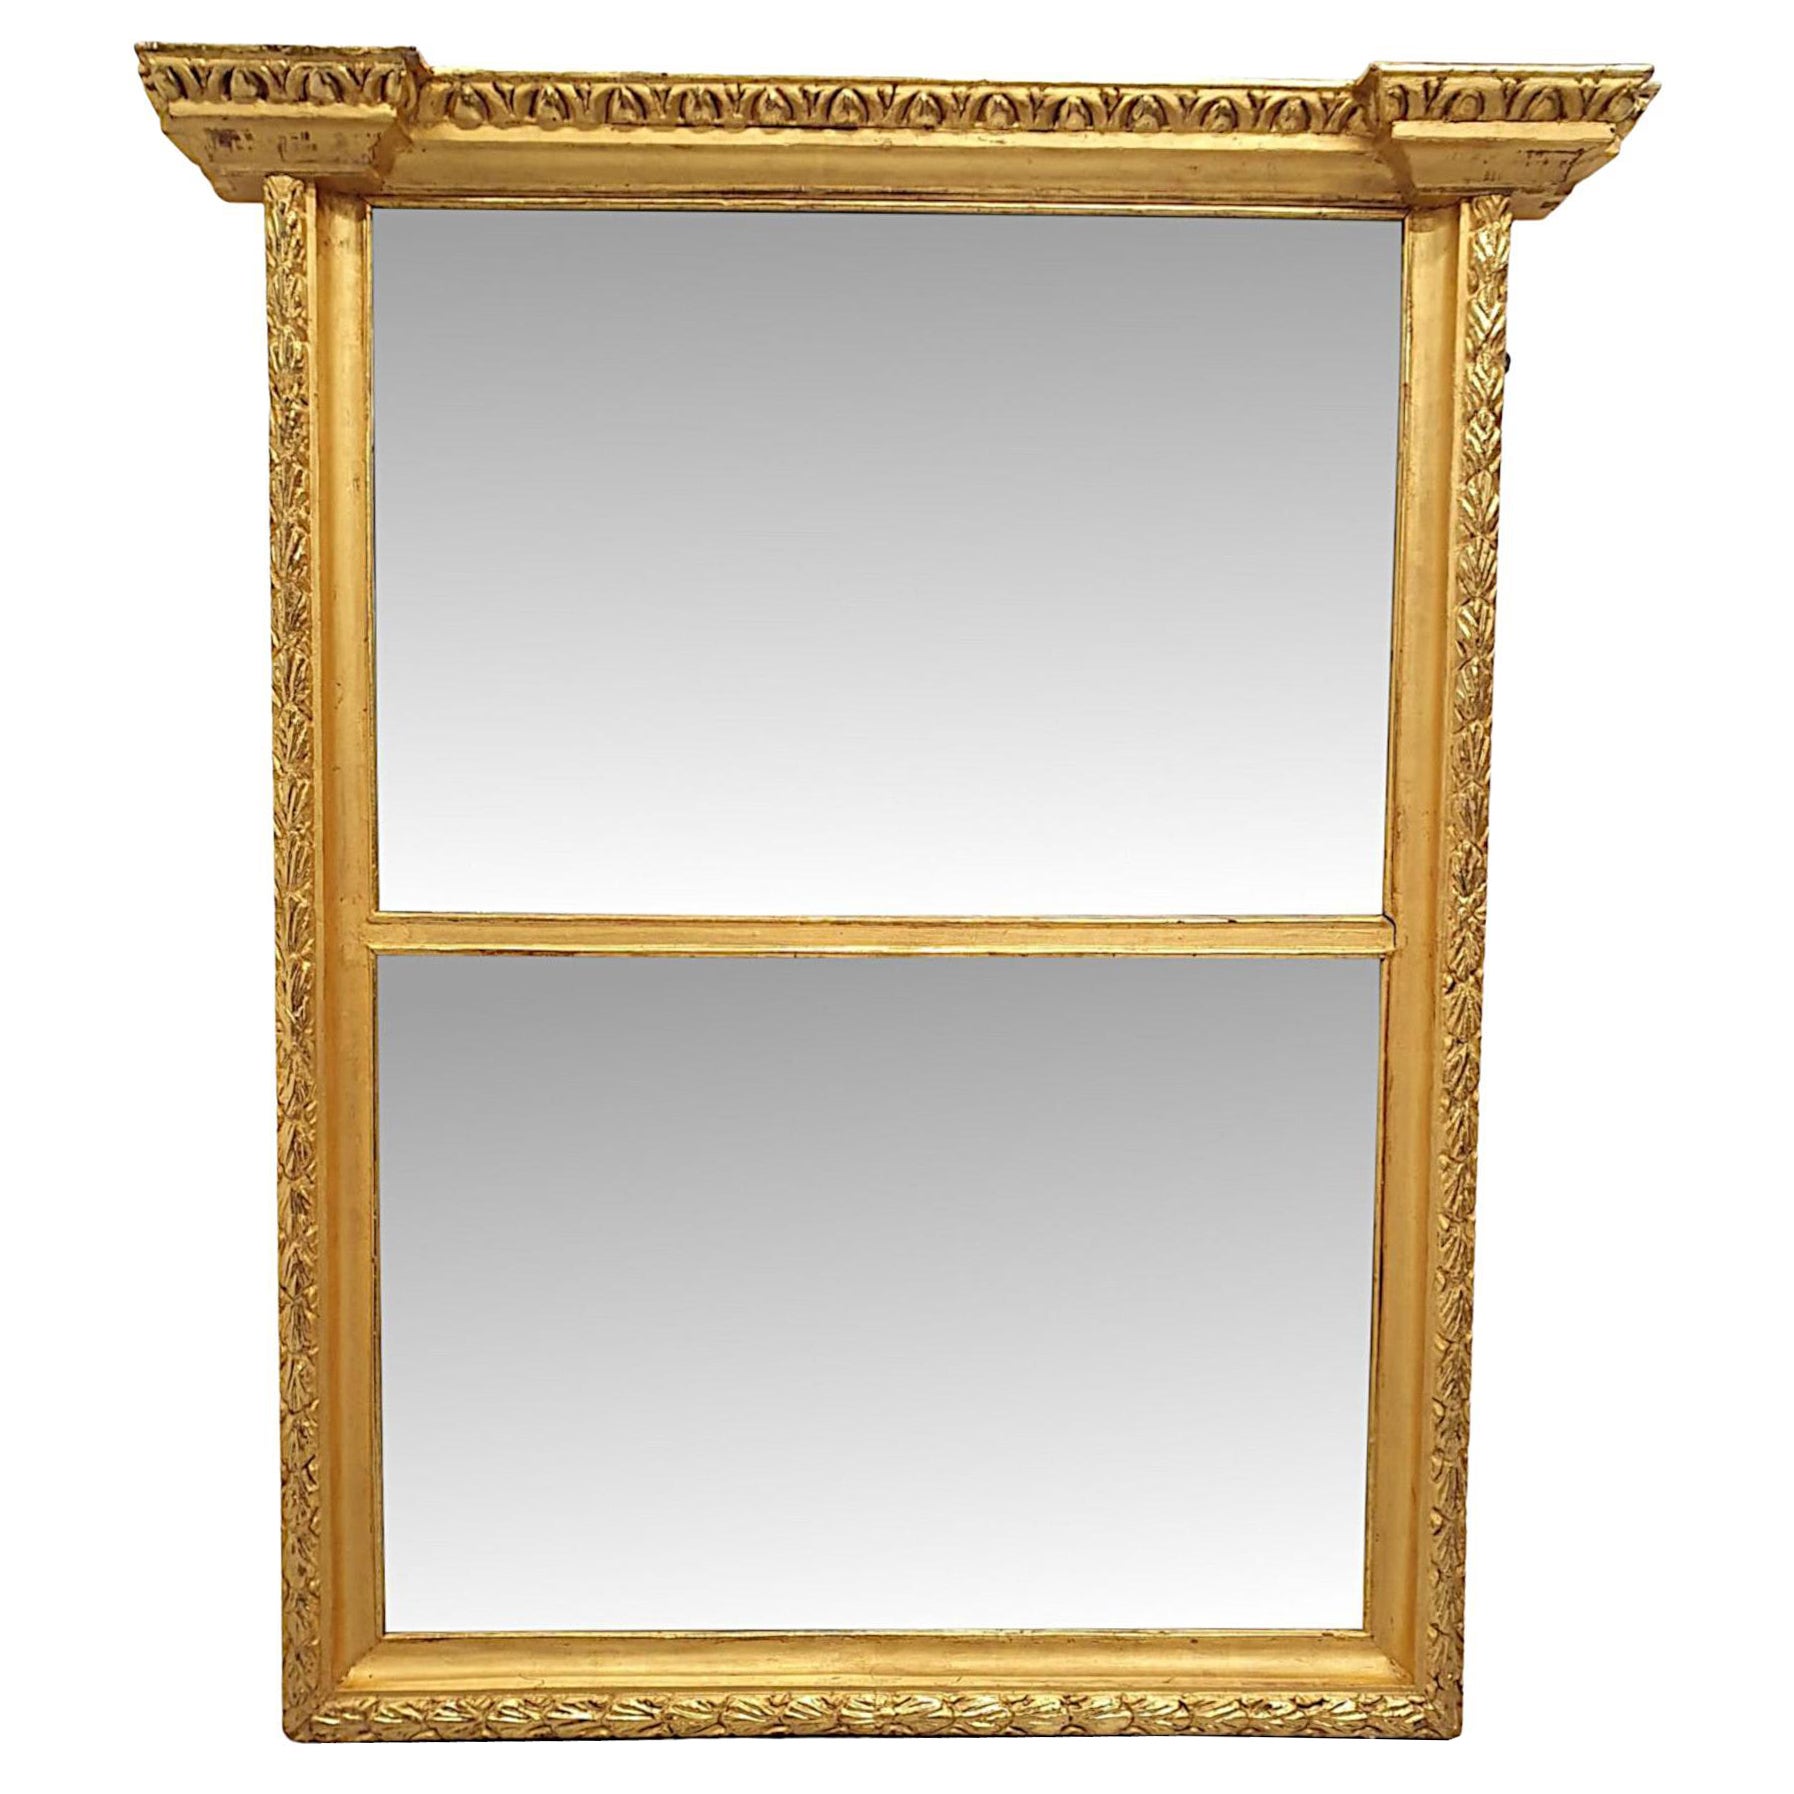 A Very Fine and Unusual 19th Century Compartmental Overmantle Mirror